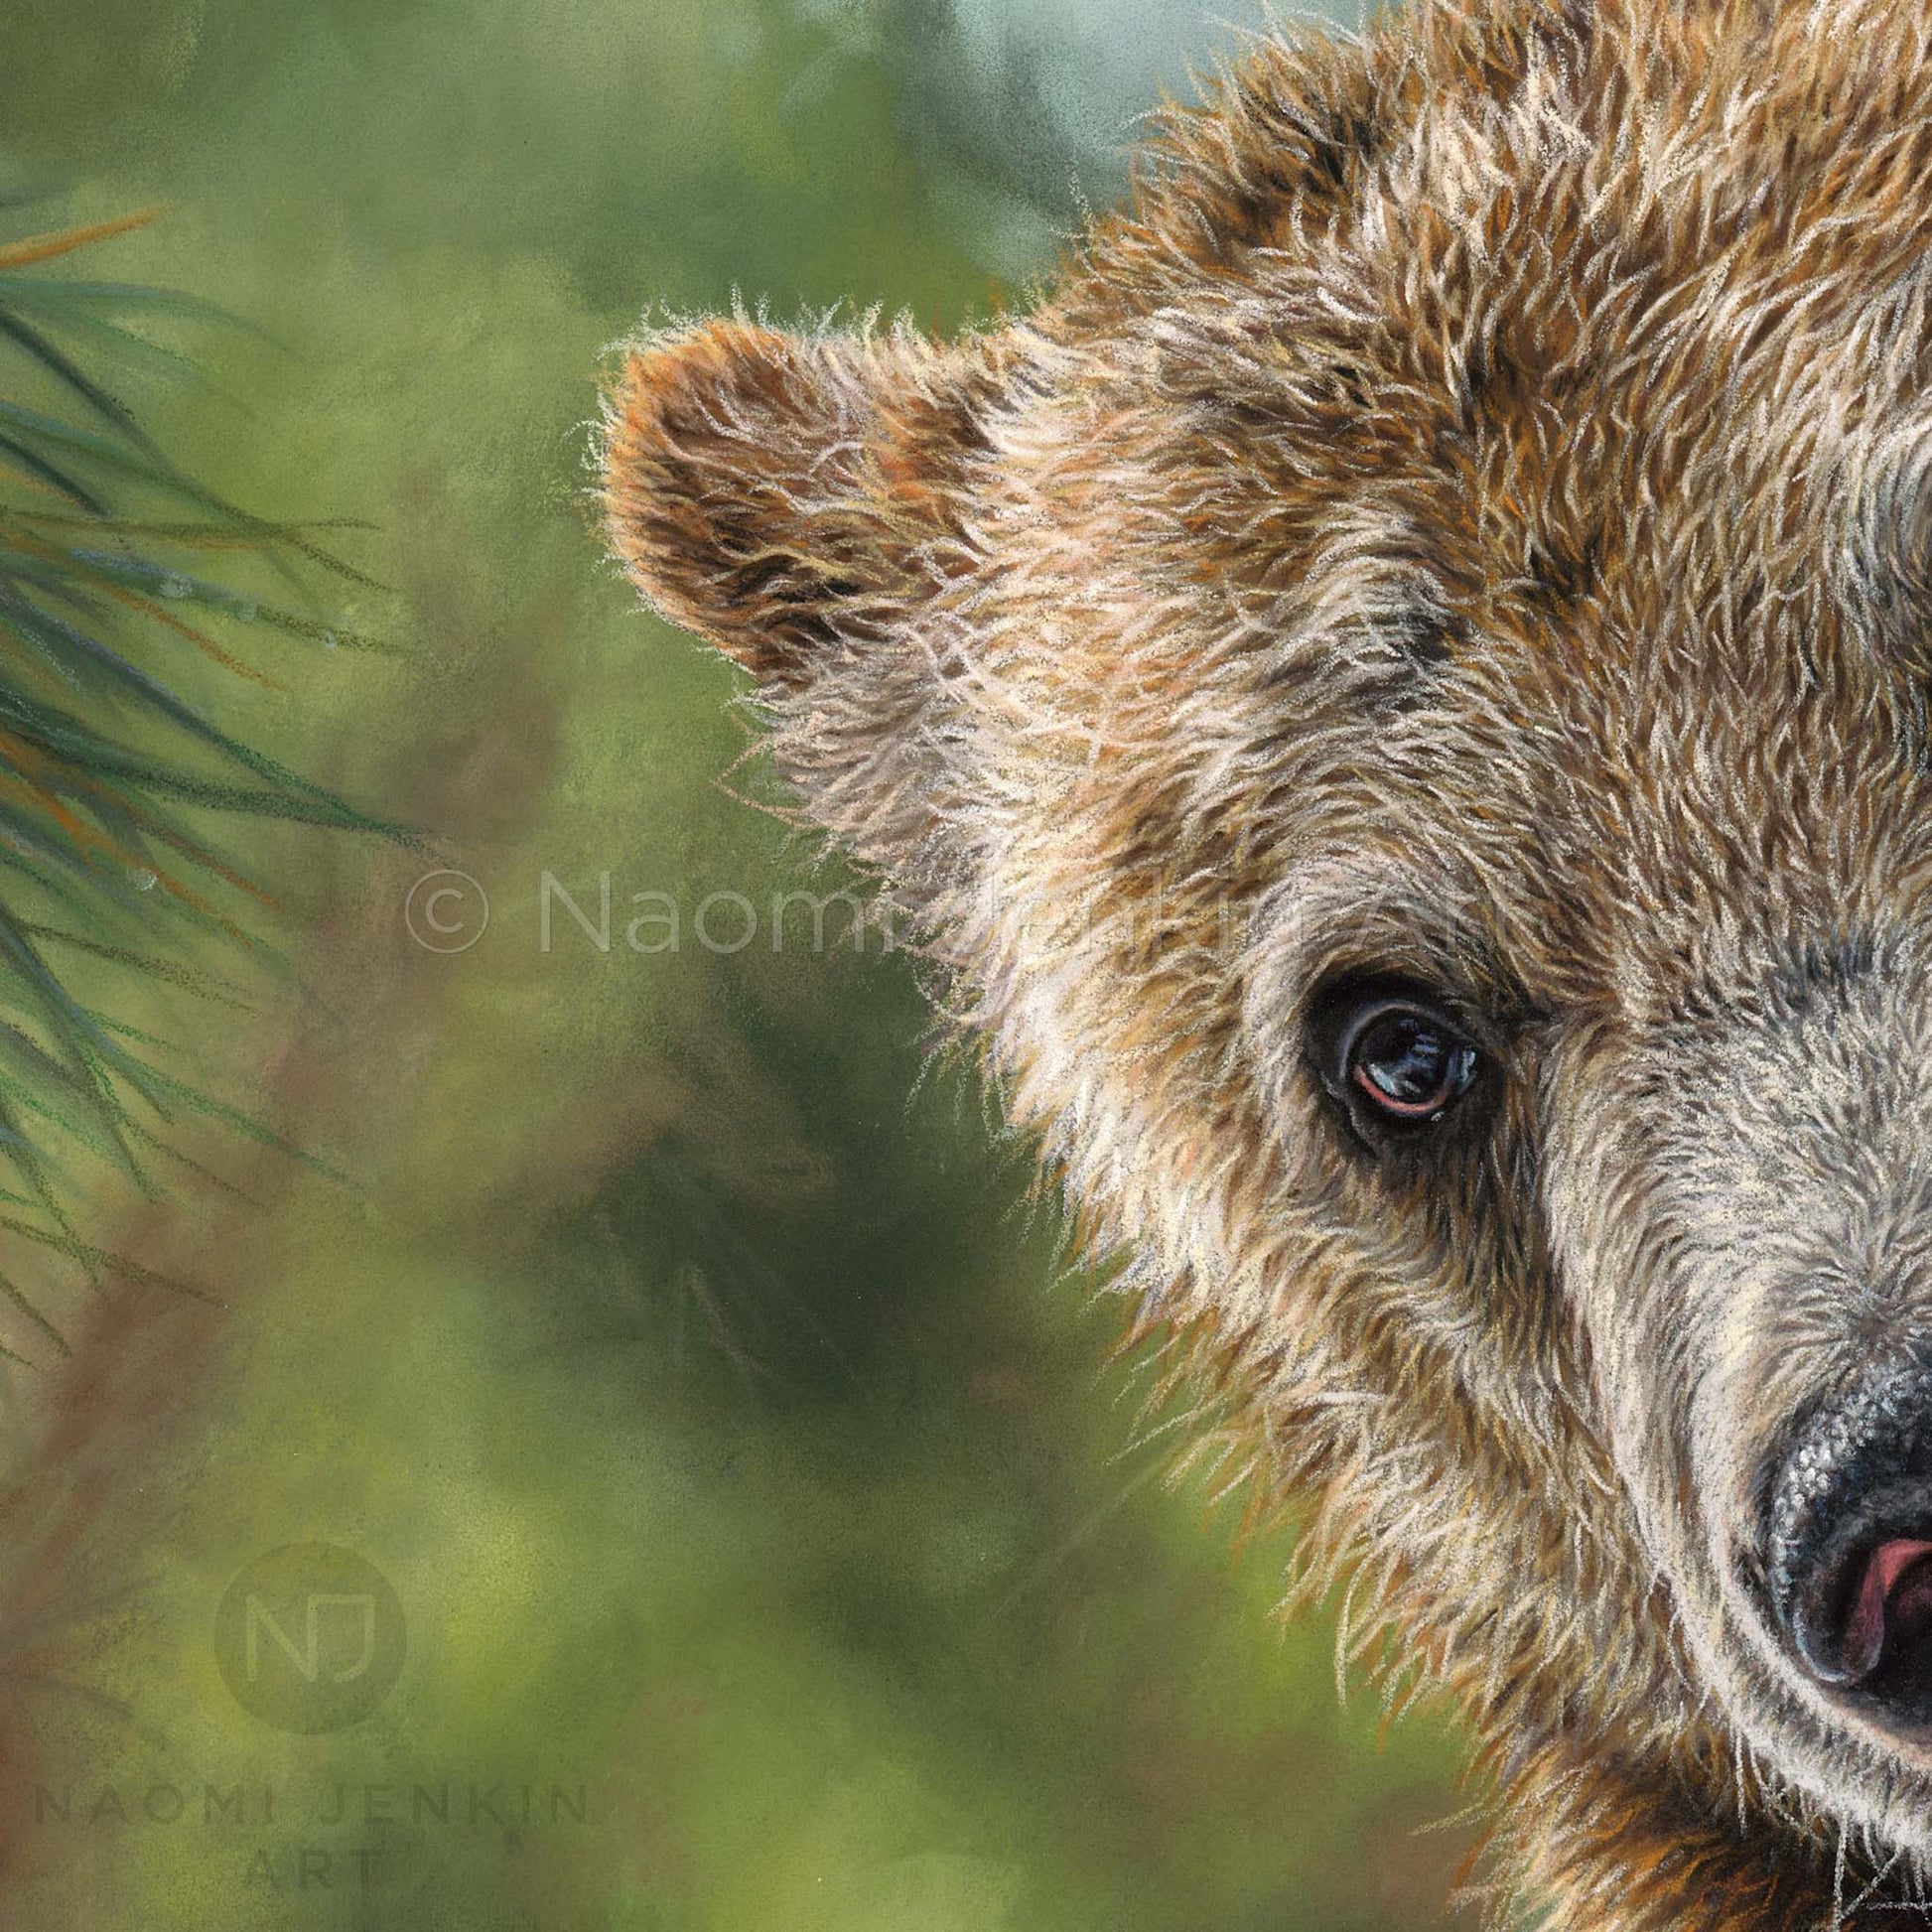 Close up of a grizzly bear taken from the bear art print 'Peekaboo' by Naomi Jenkin